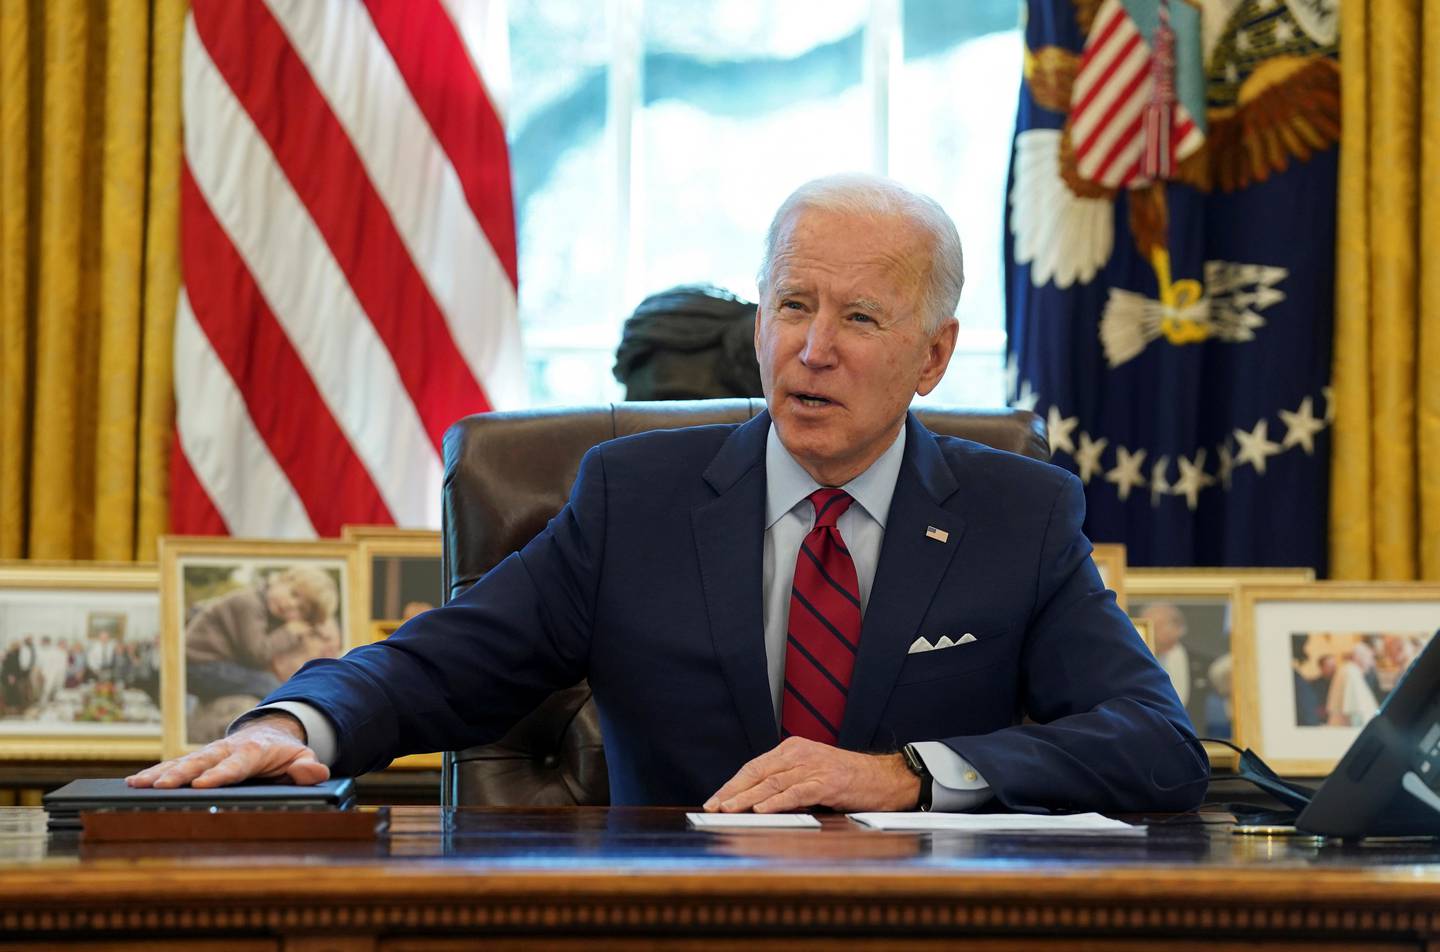 FILE PHOTO: U.S. President Joe Biden speaks before signing executive orders strengthening access to affordable healthcare at the White House in Washington, U.S., January 28, 2021. REUTERS/Kevin Lamarque/File Photo